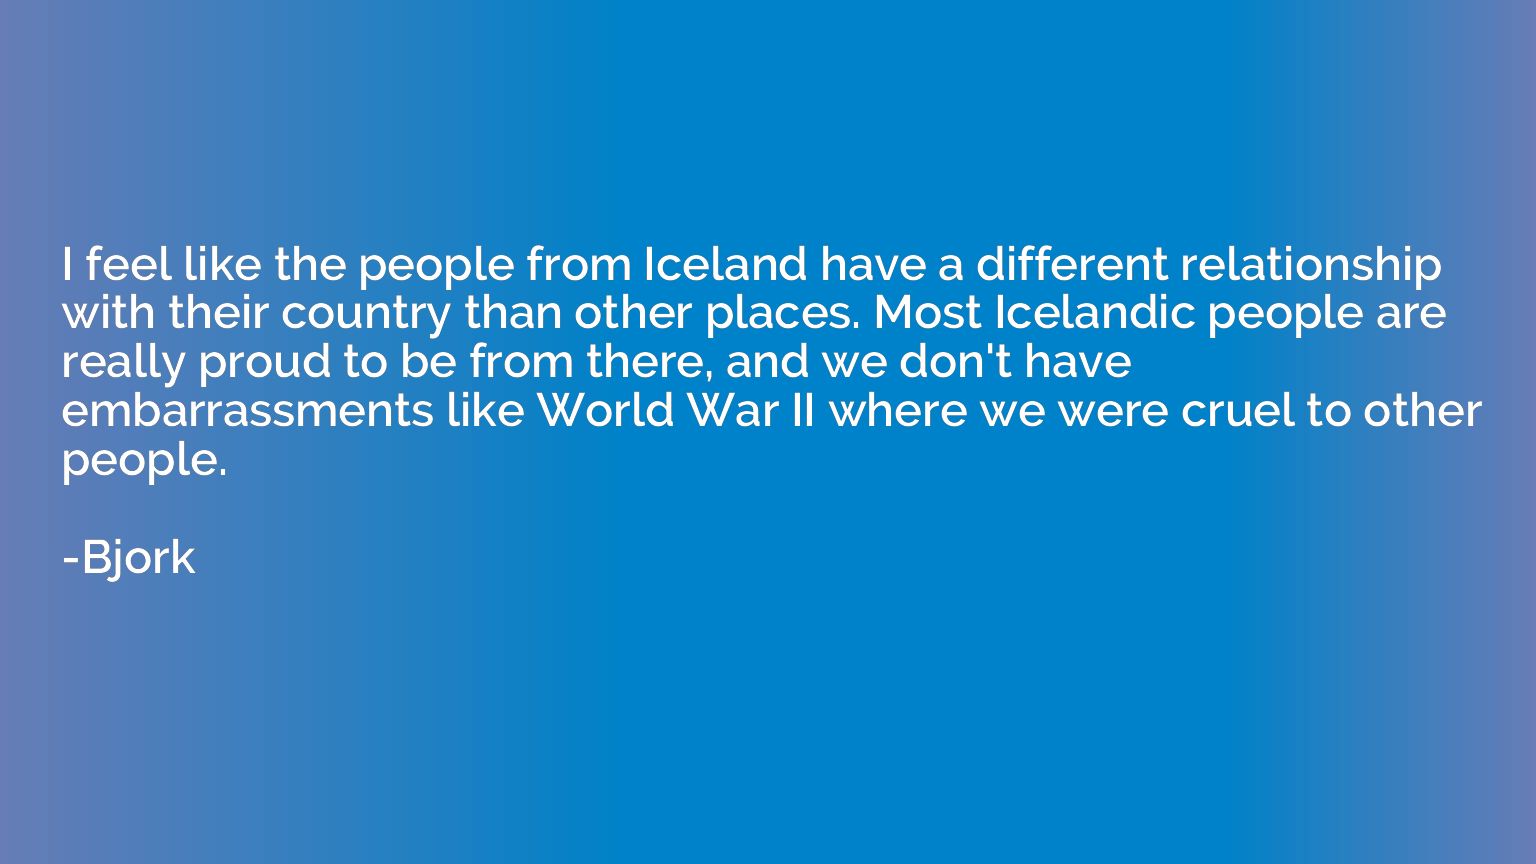 I feel like the people from Iceland have a different relatio